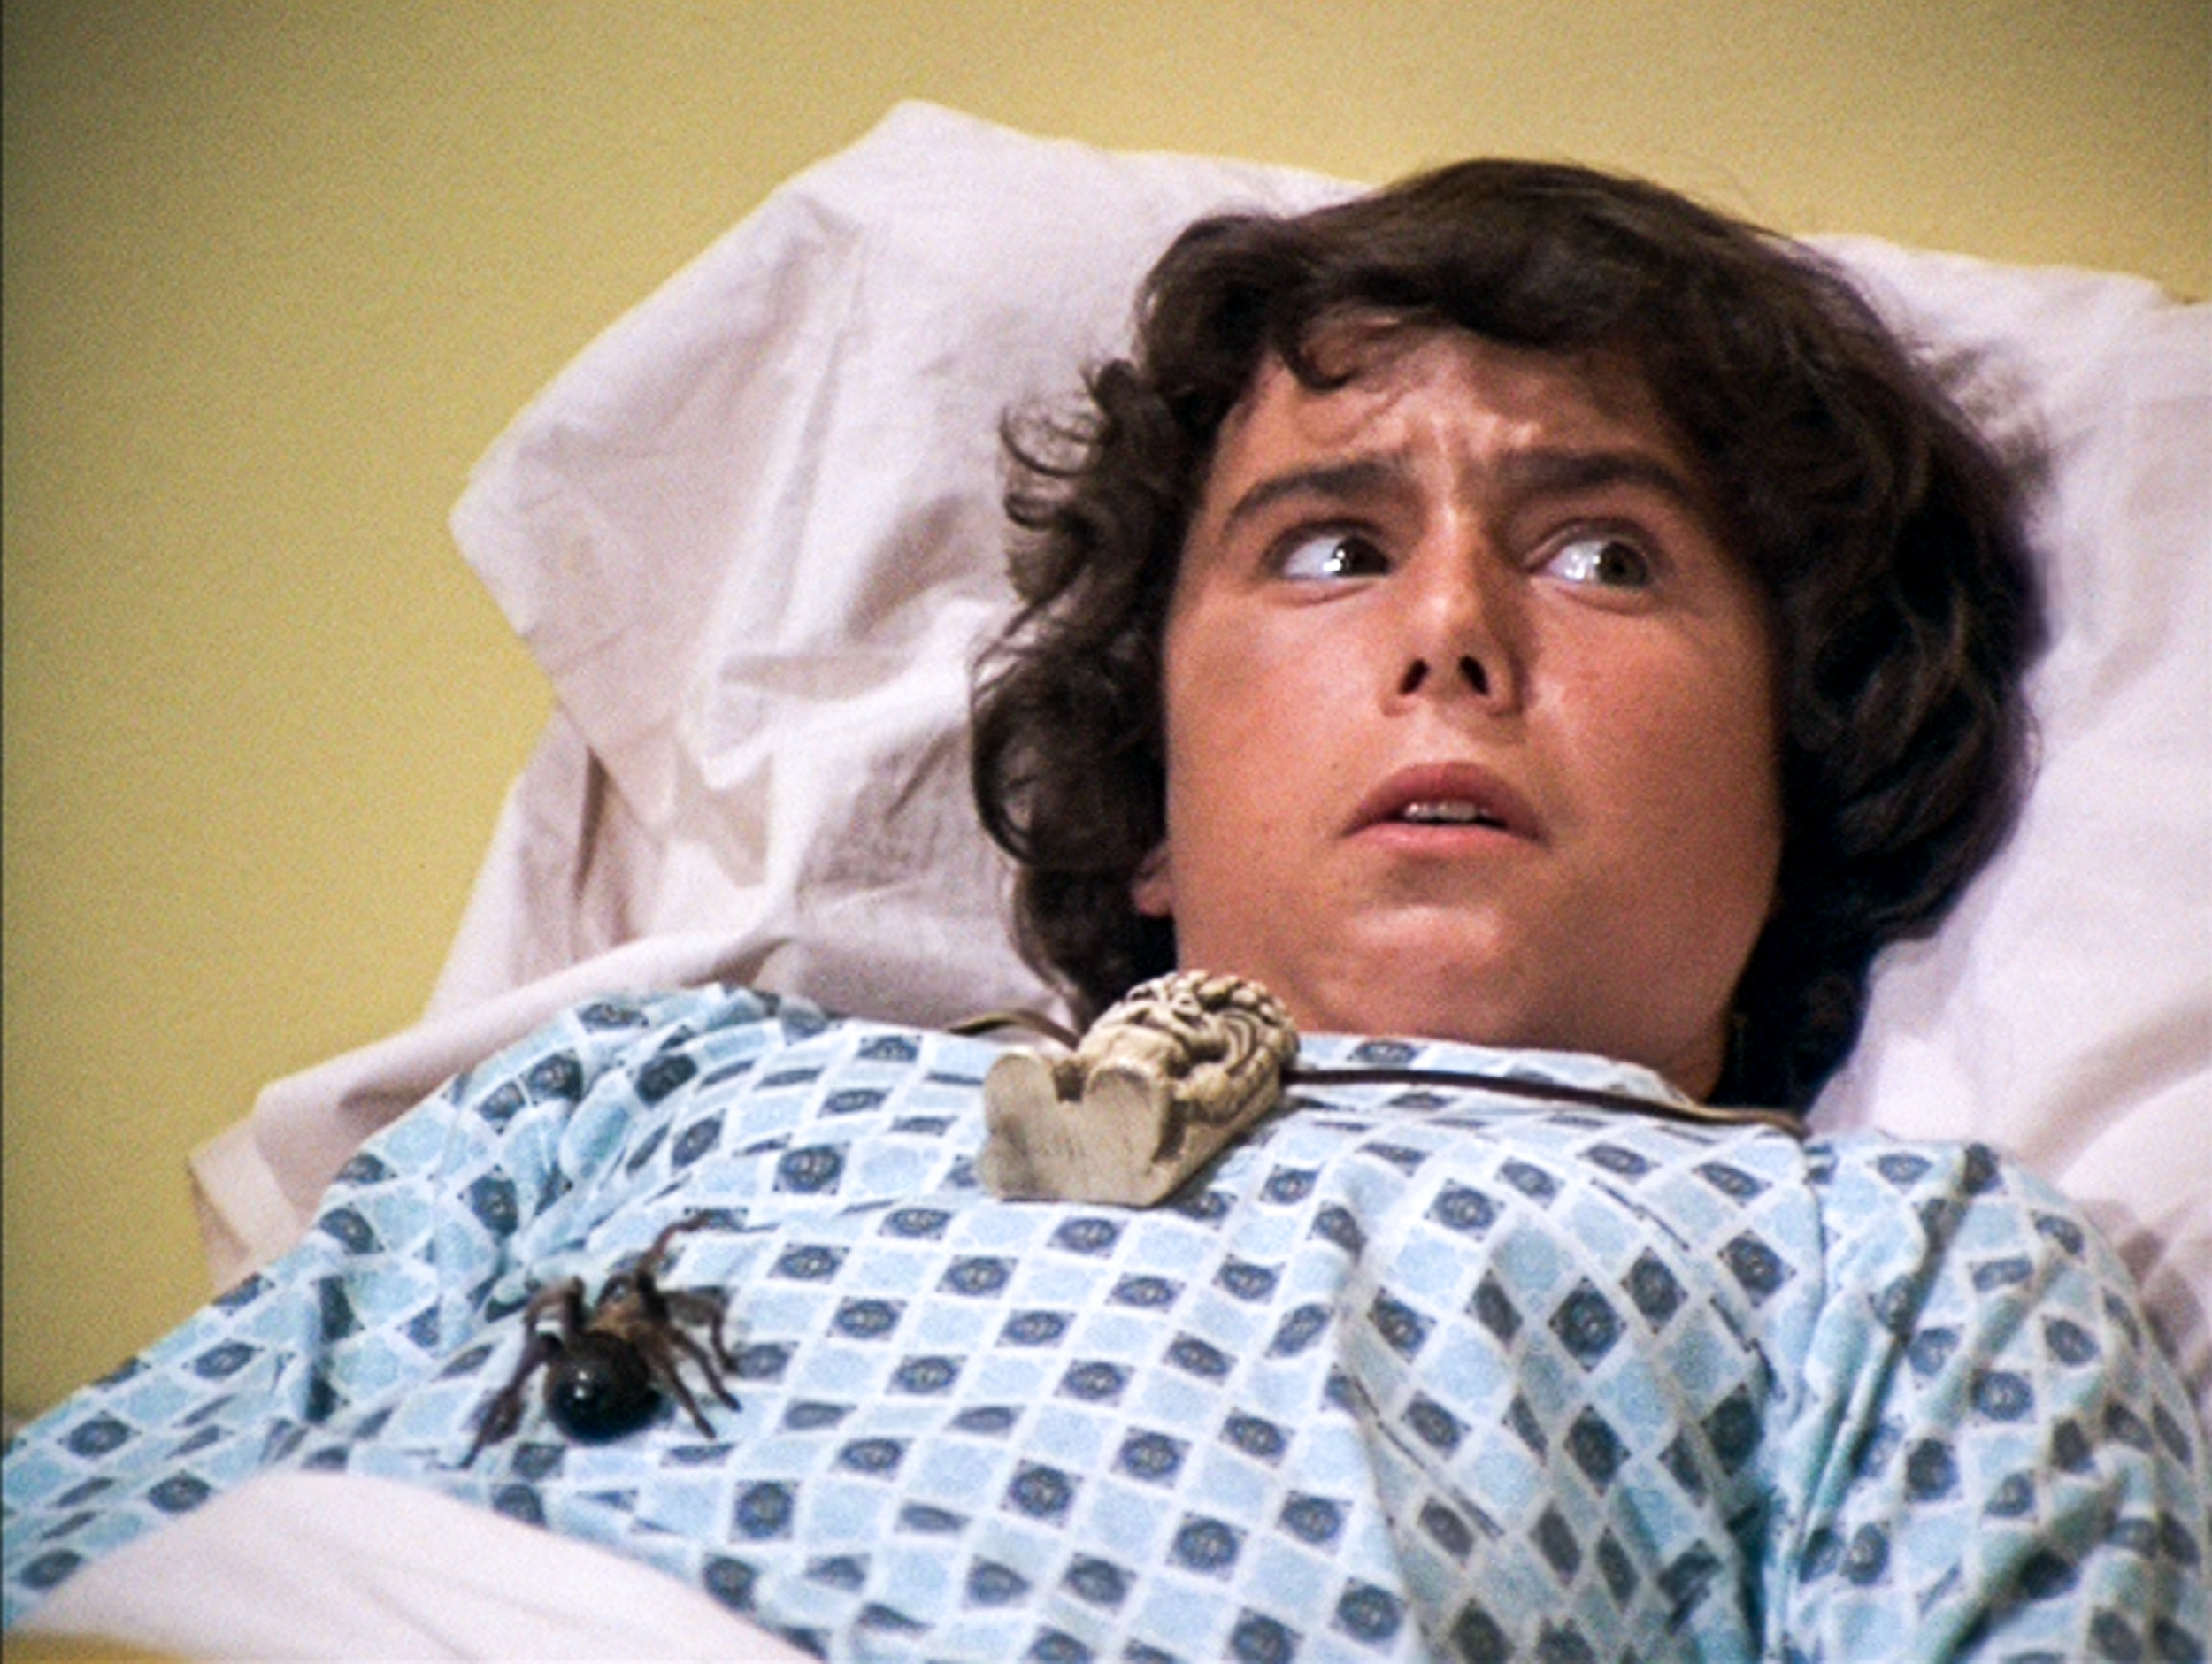 Christopher Knight in "The Brady Bunch" in 1972 | Source: Getty Images